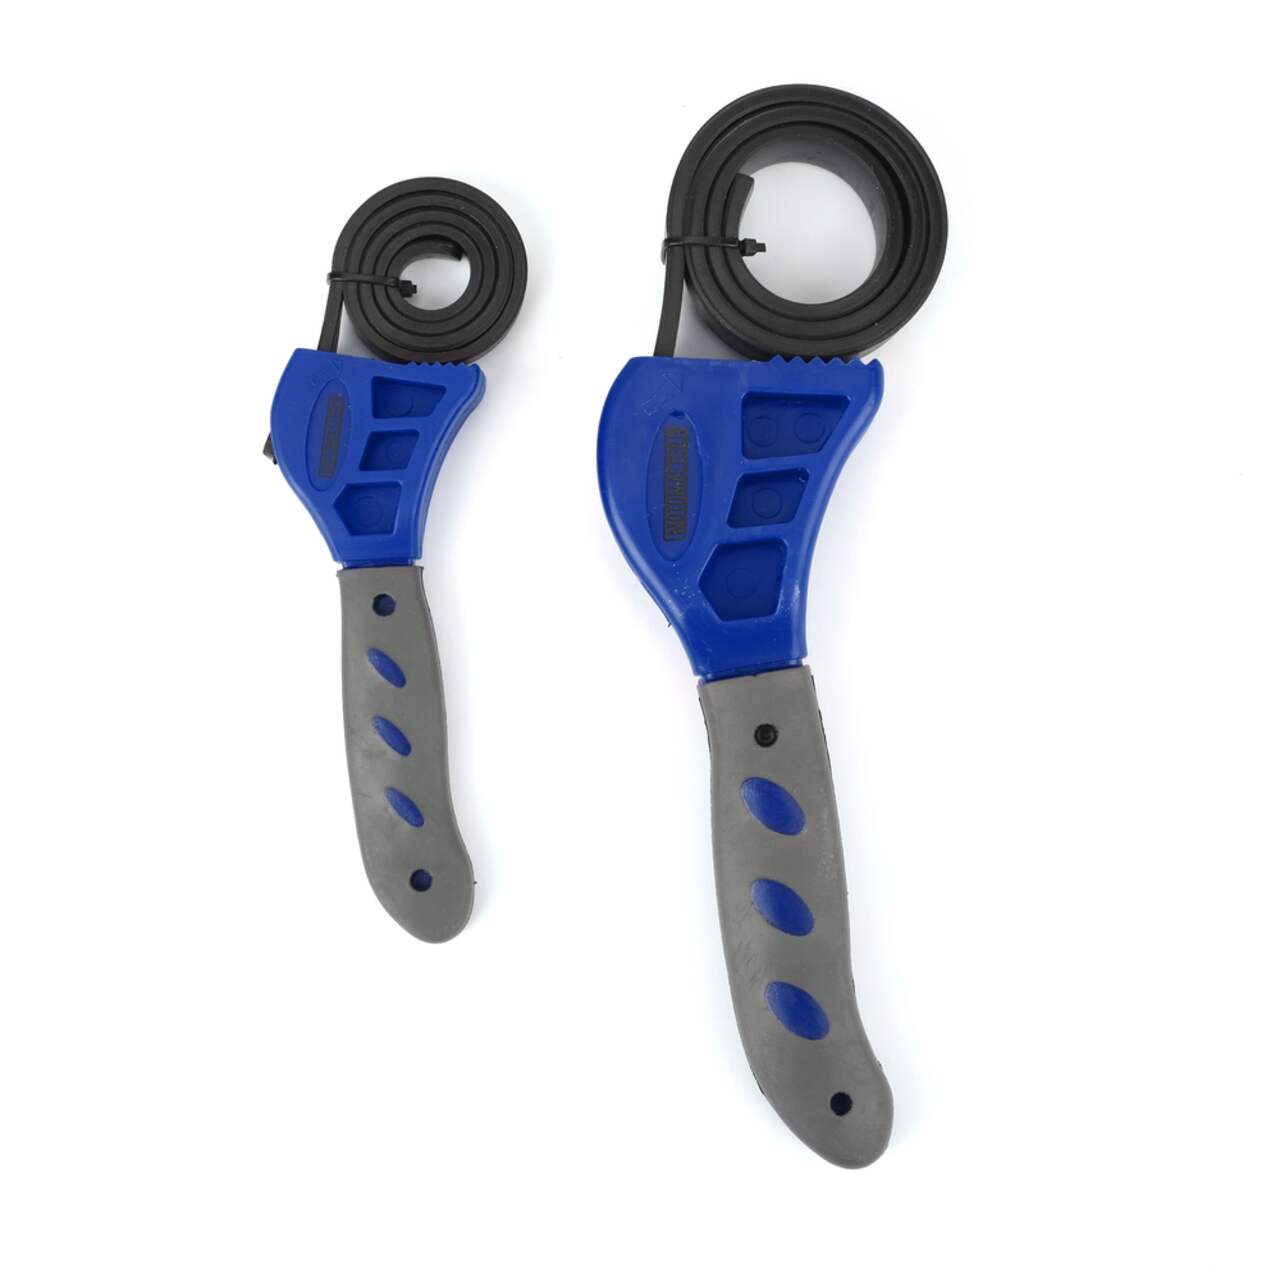 Strap Wrench Set - Canac